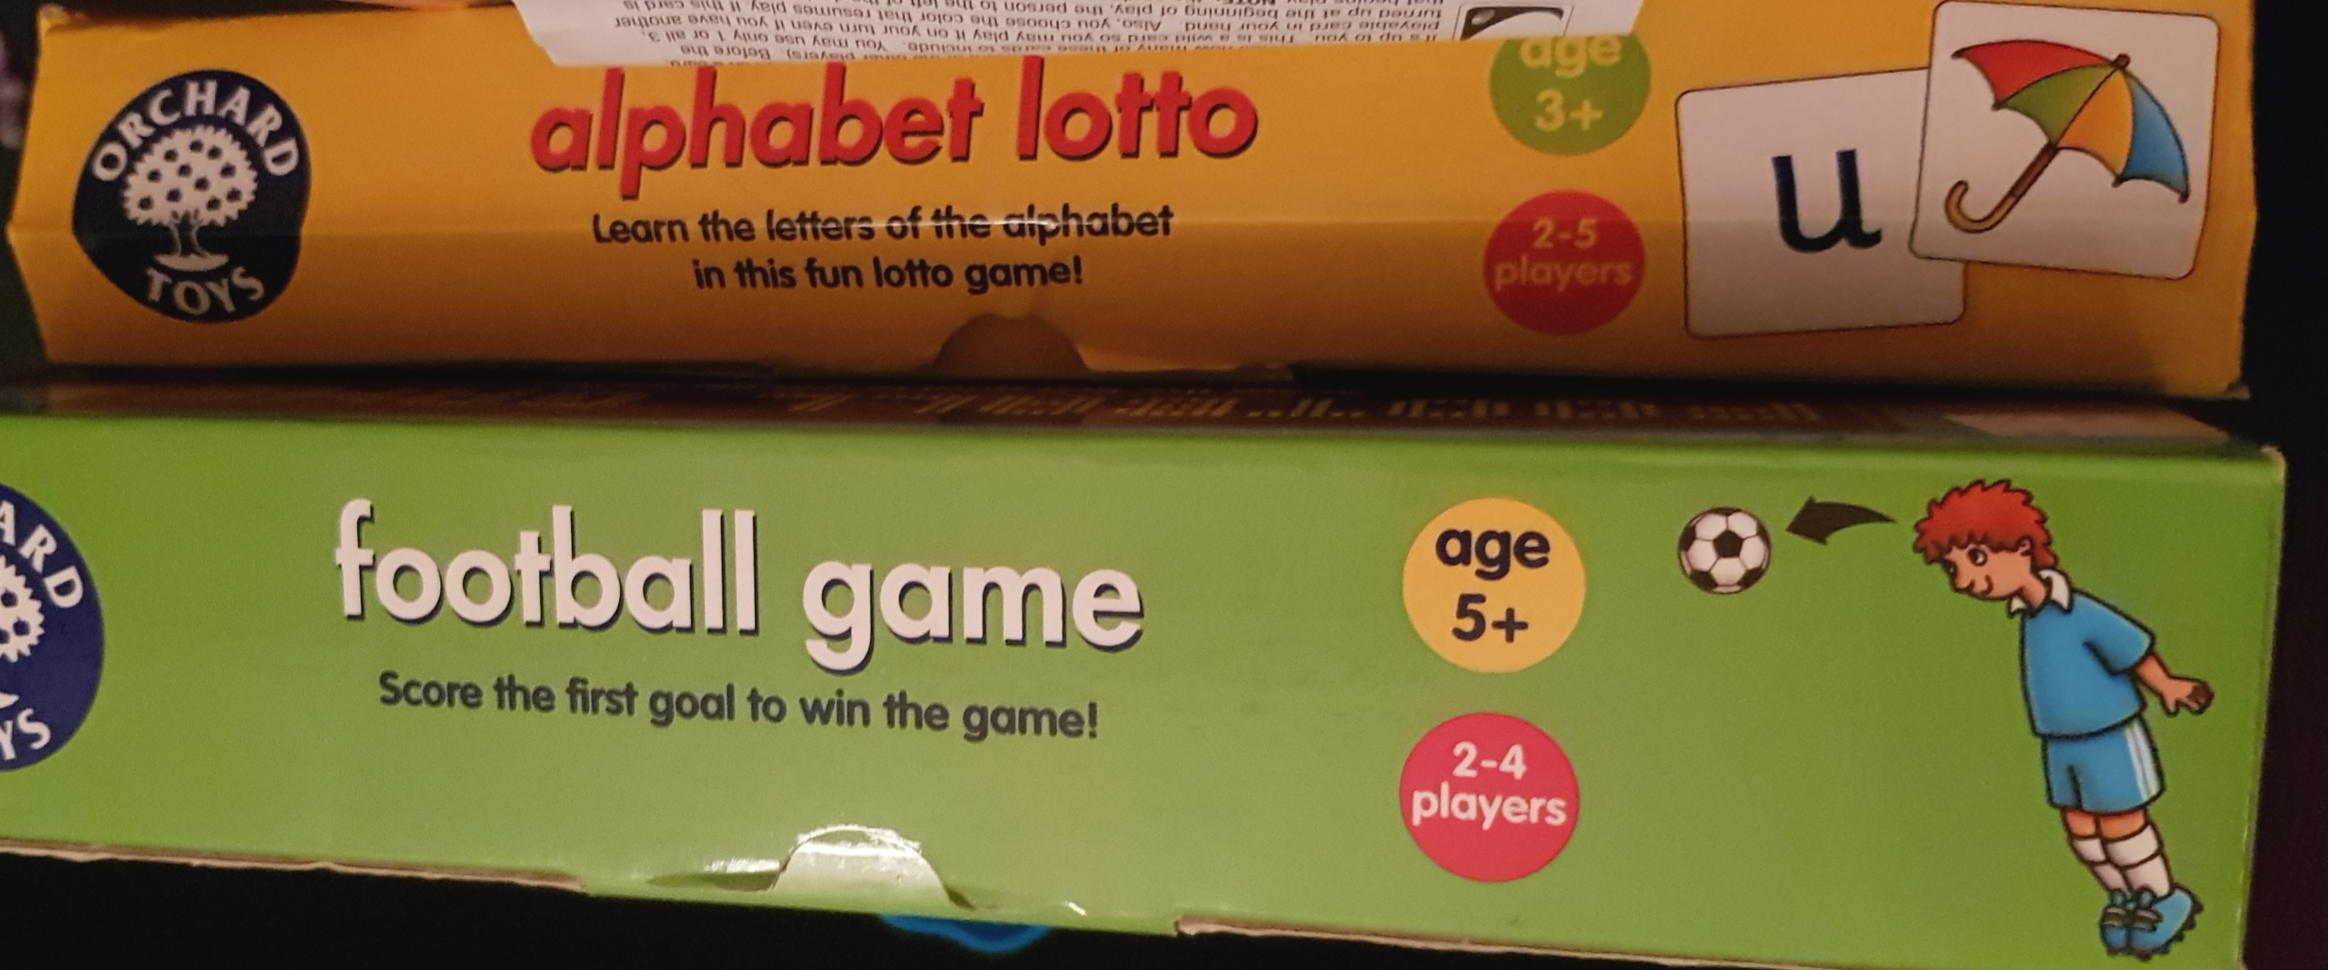 Orchard Toys game boxes